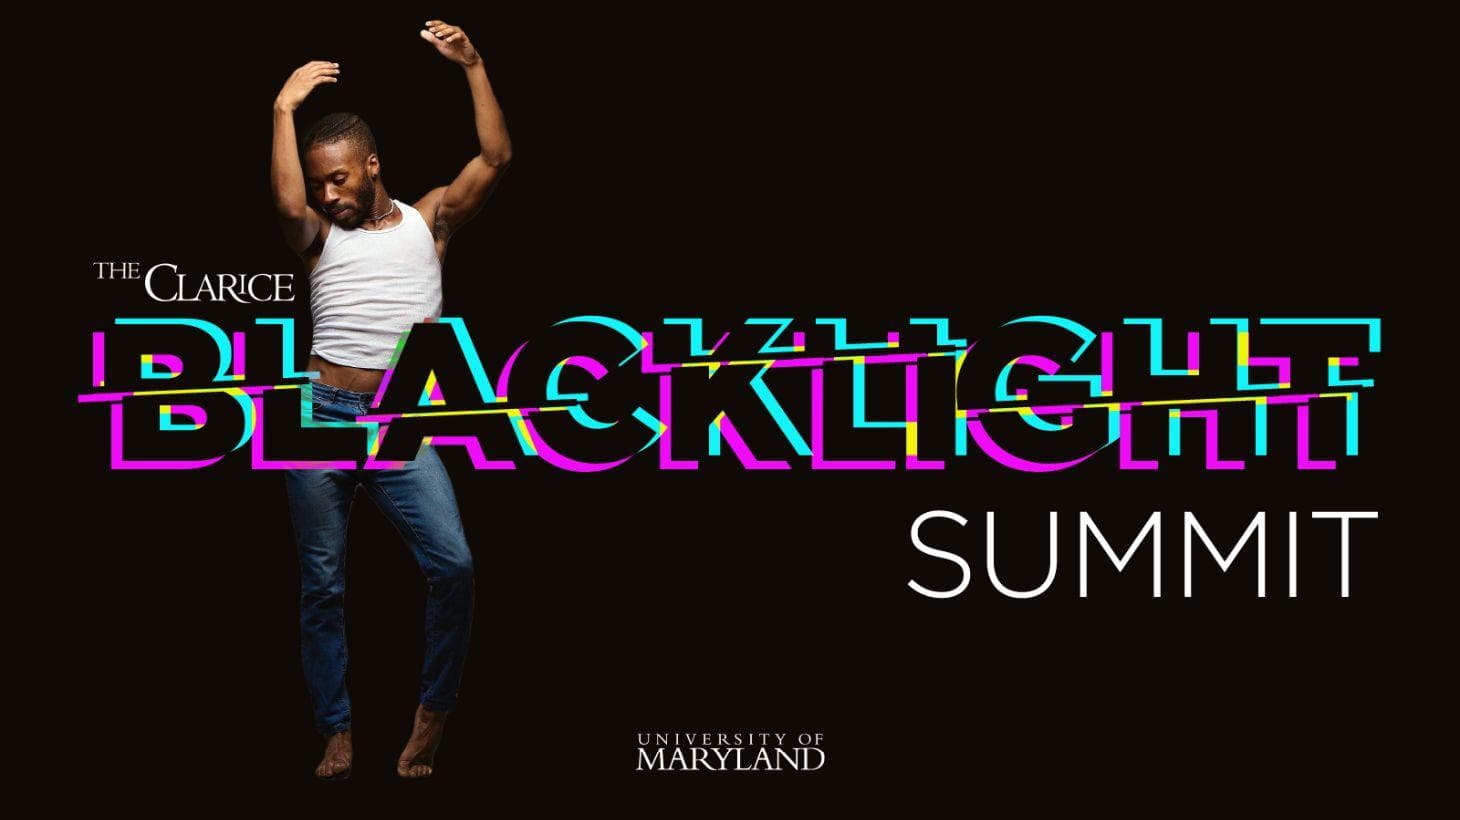 A male dancer poses behind the text BlackLight Summit against a black background.